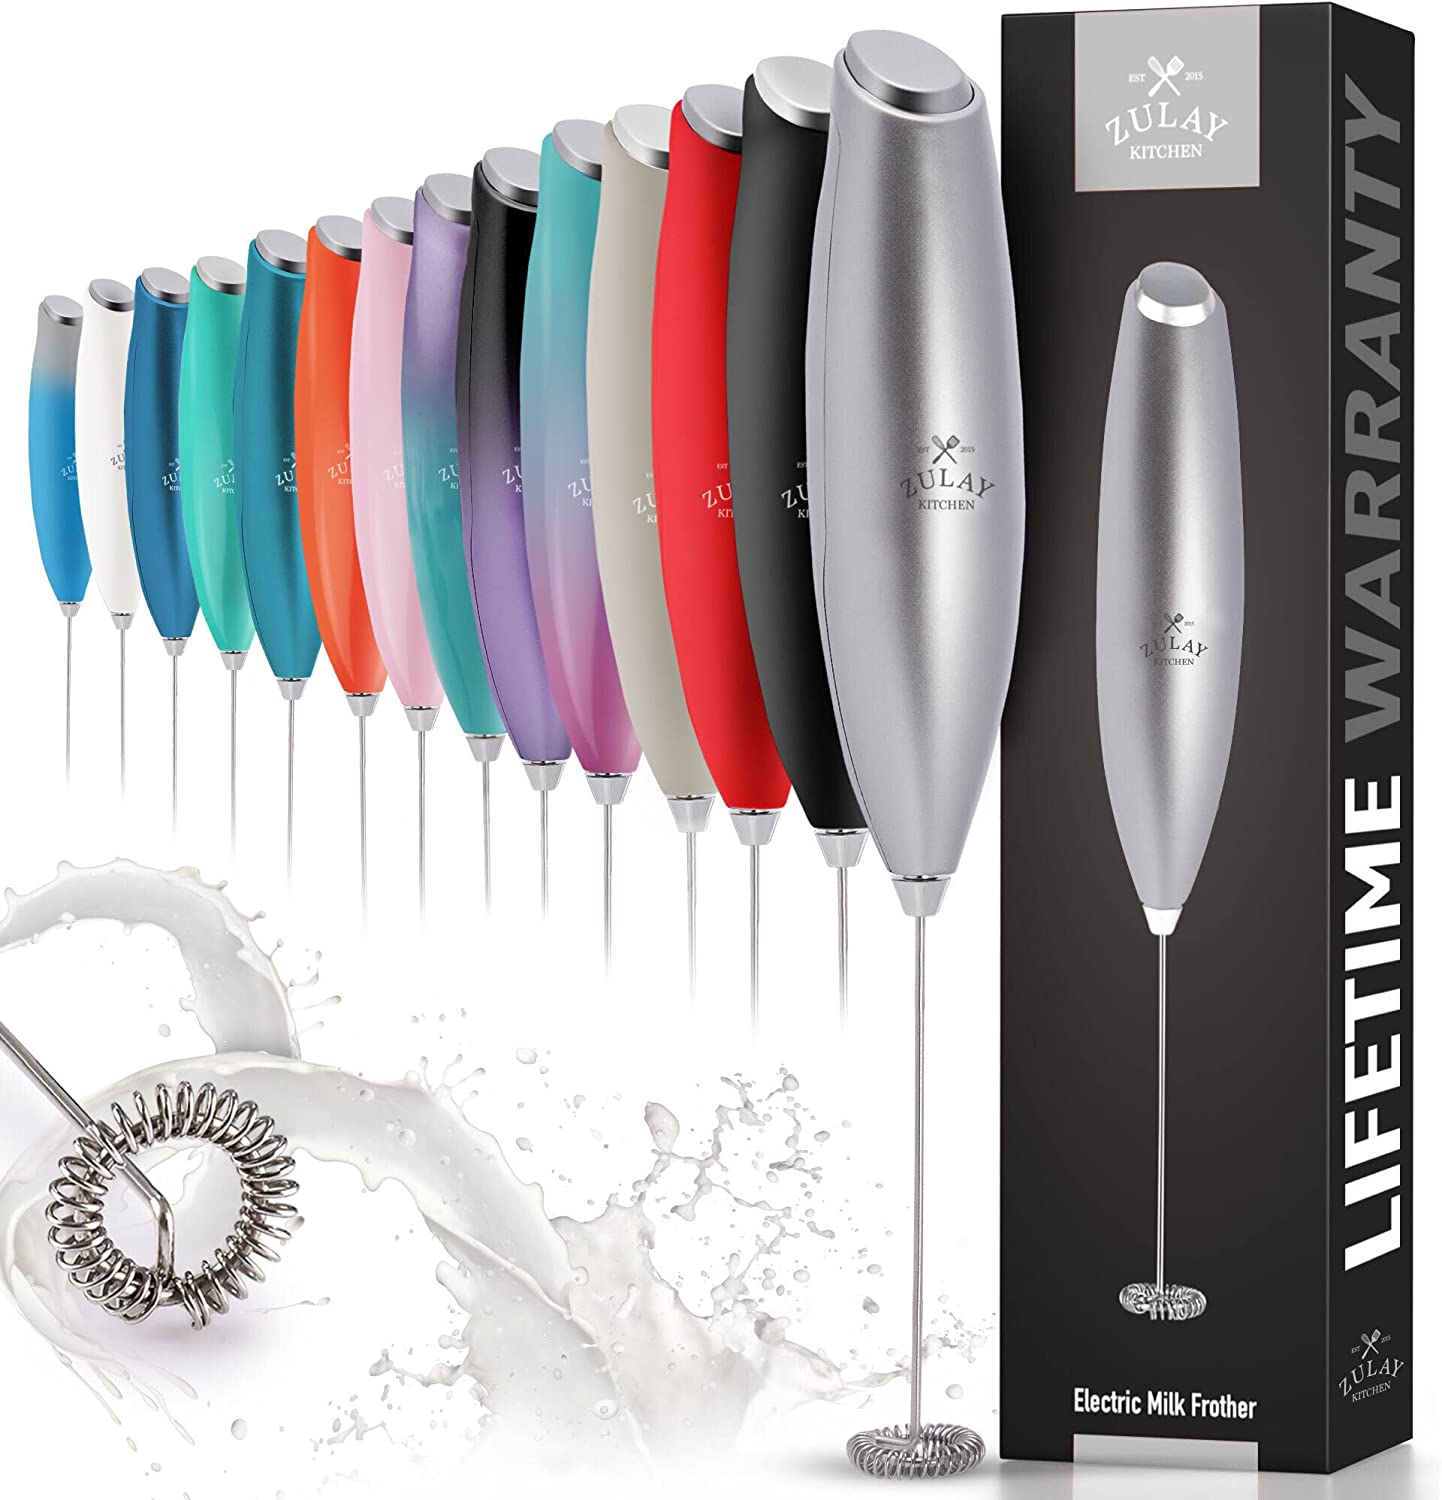 Zulay Electric Milk Frother available in multiple different colors